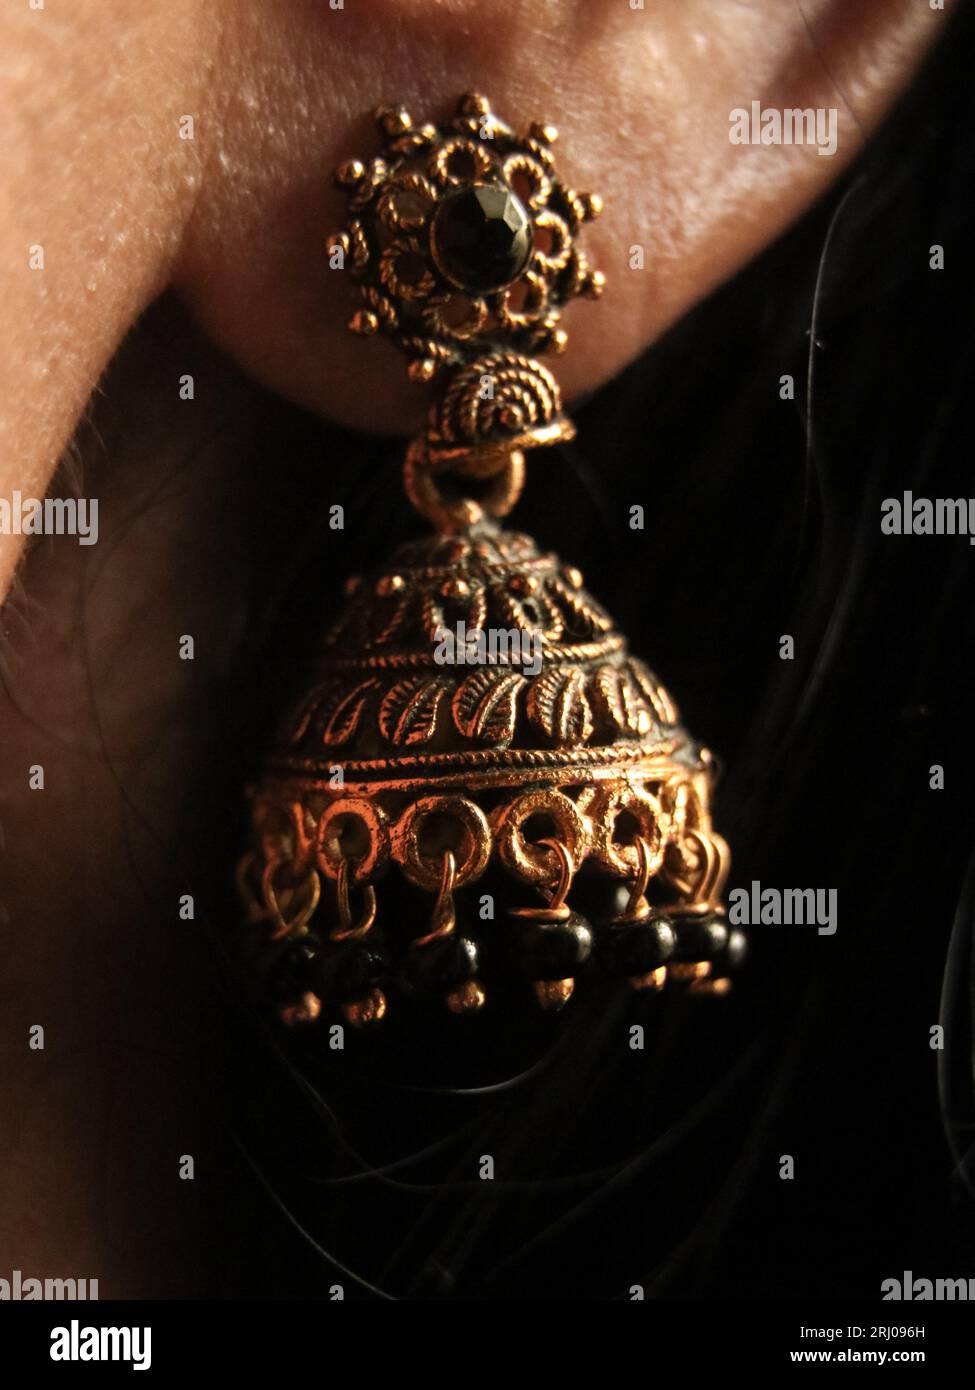 vintage inidan designer gold plated jhumki earring ornament with detailed antique design in closeup on a woman's ear Stock Photo